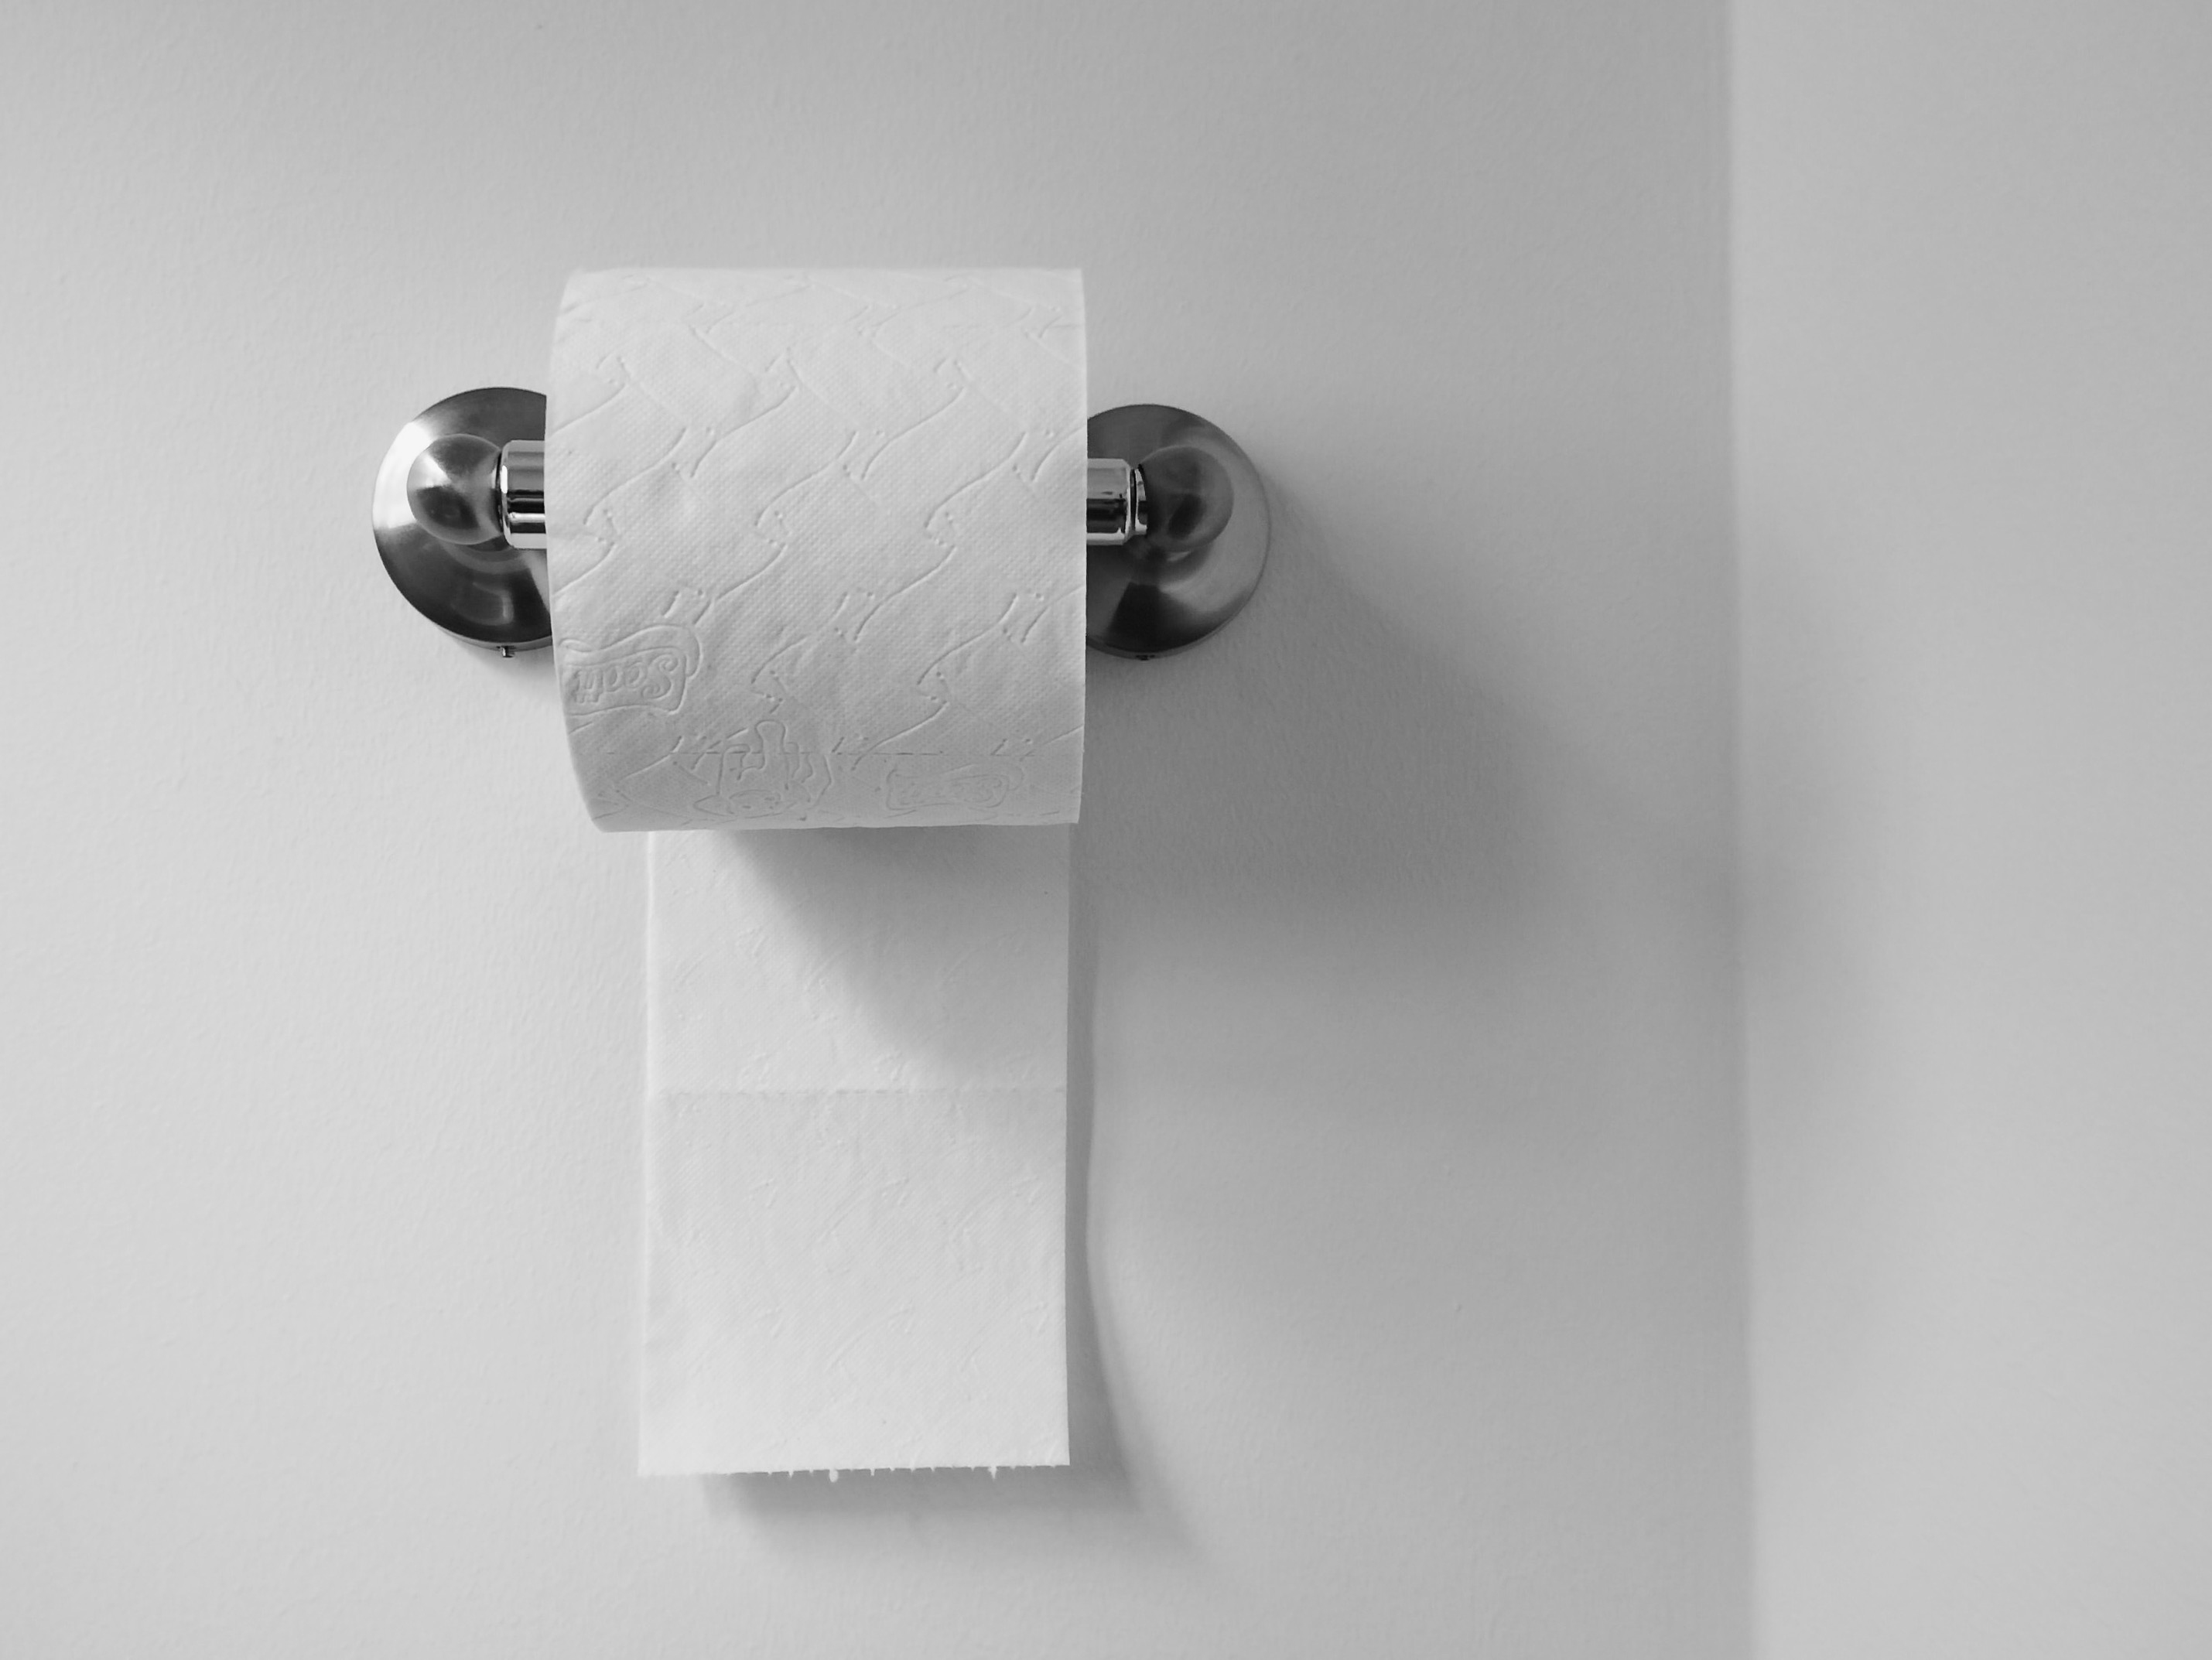 All Toilet Paper Roll Hacks Are Bad